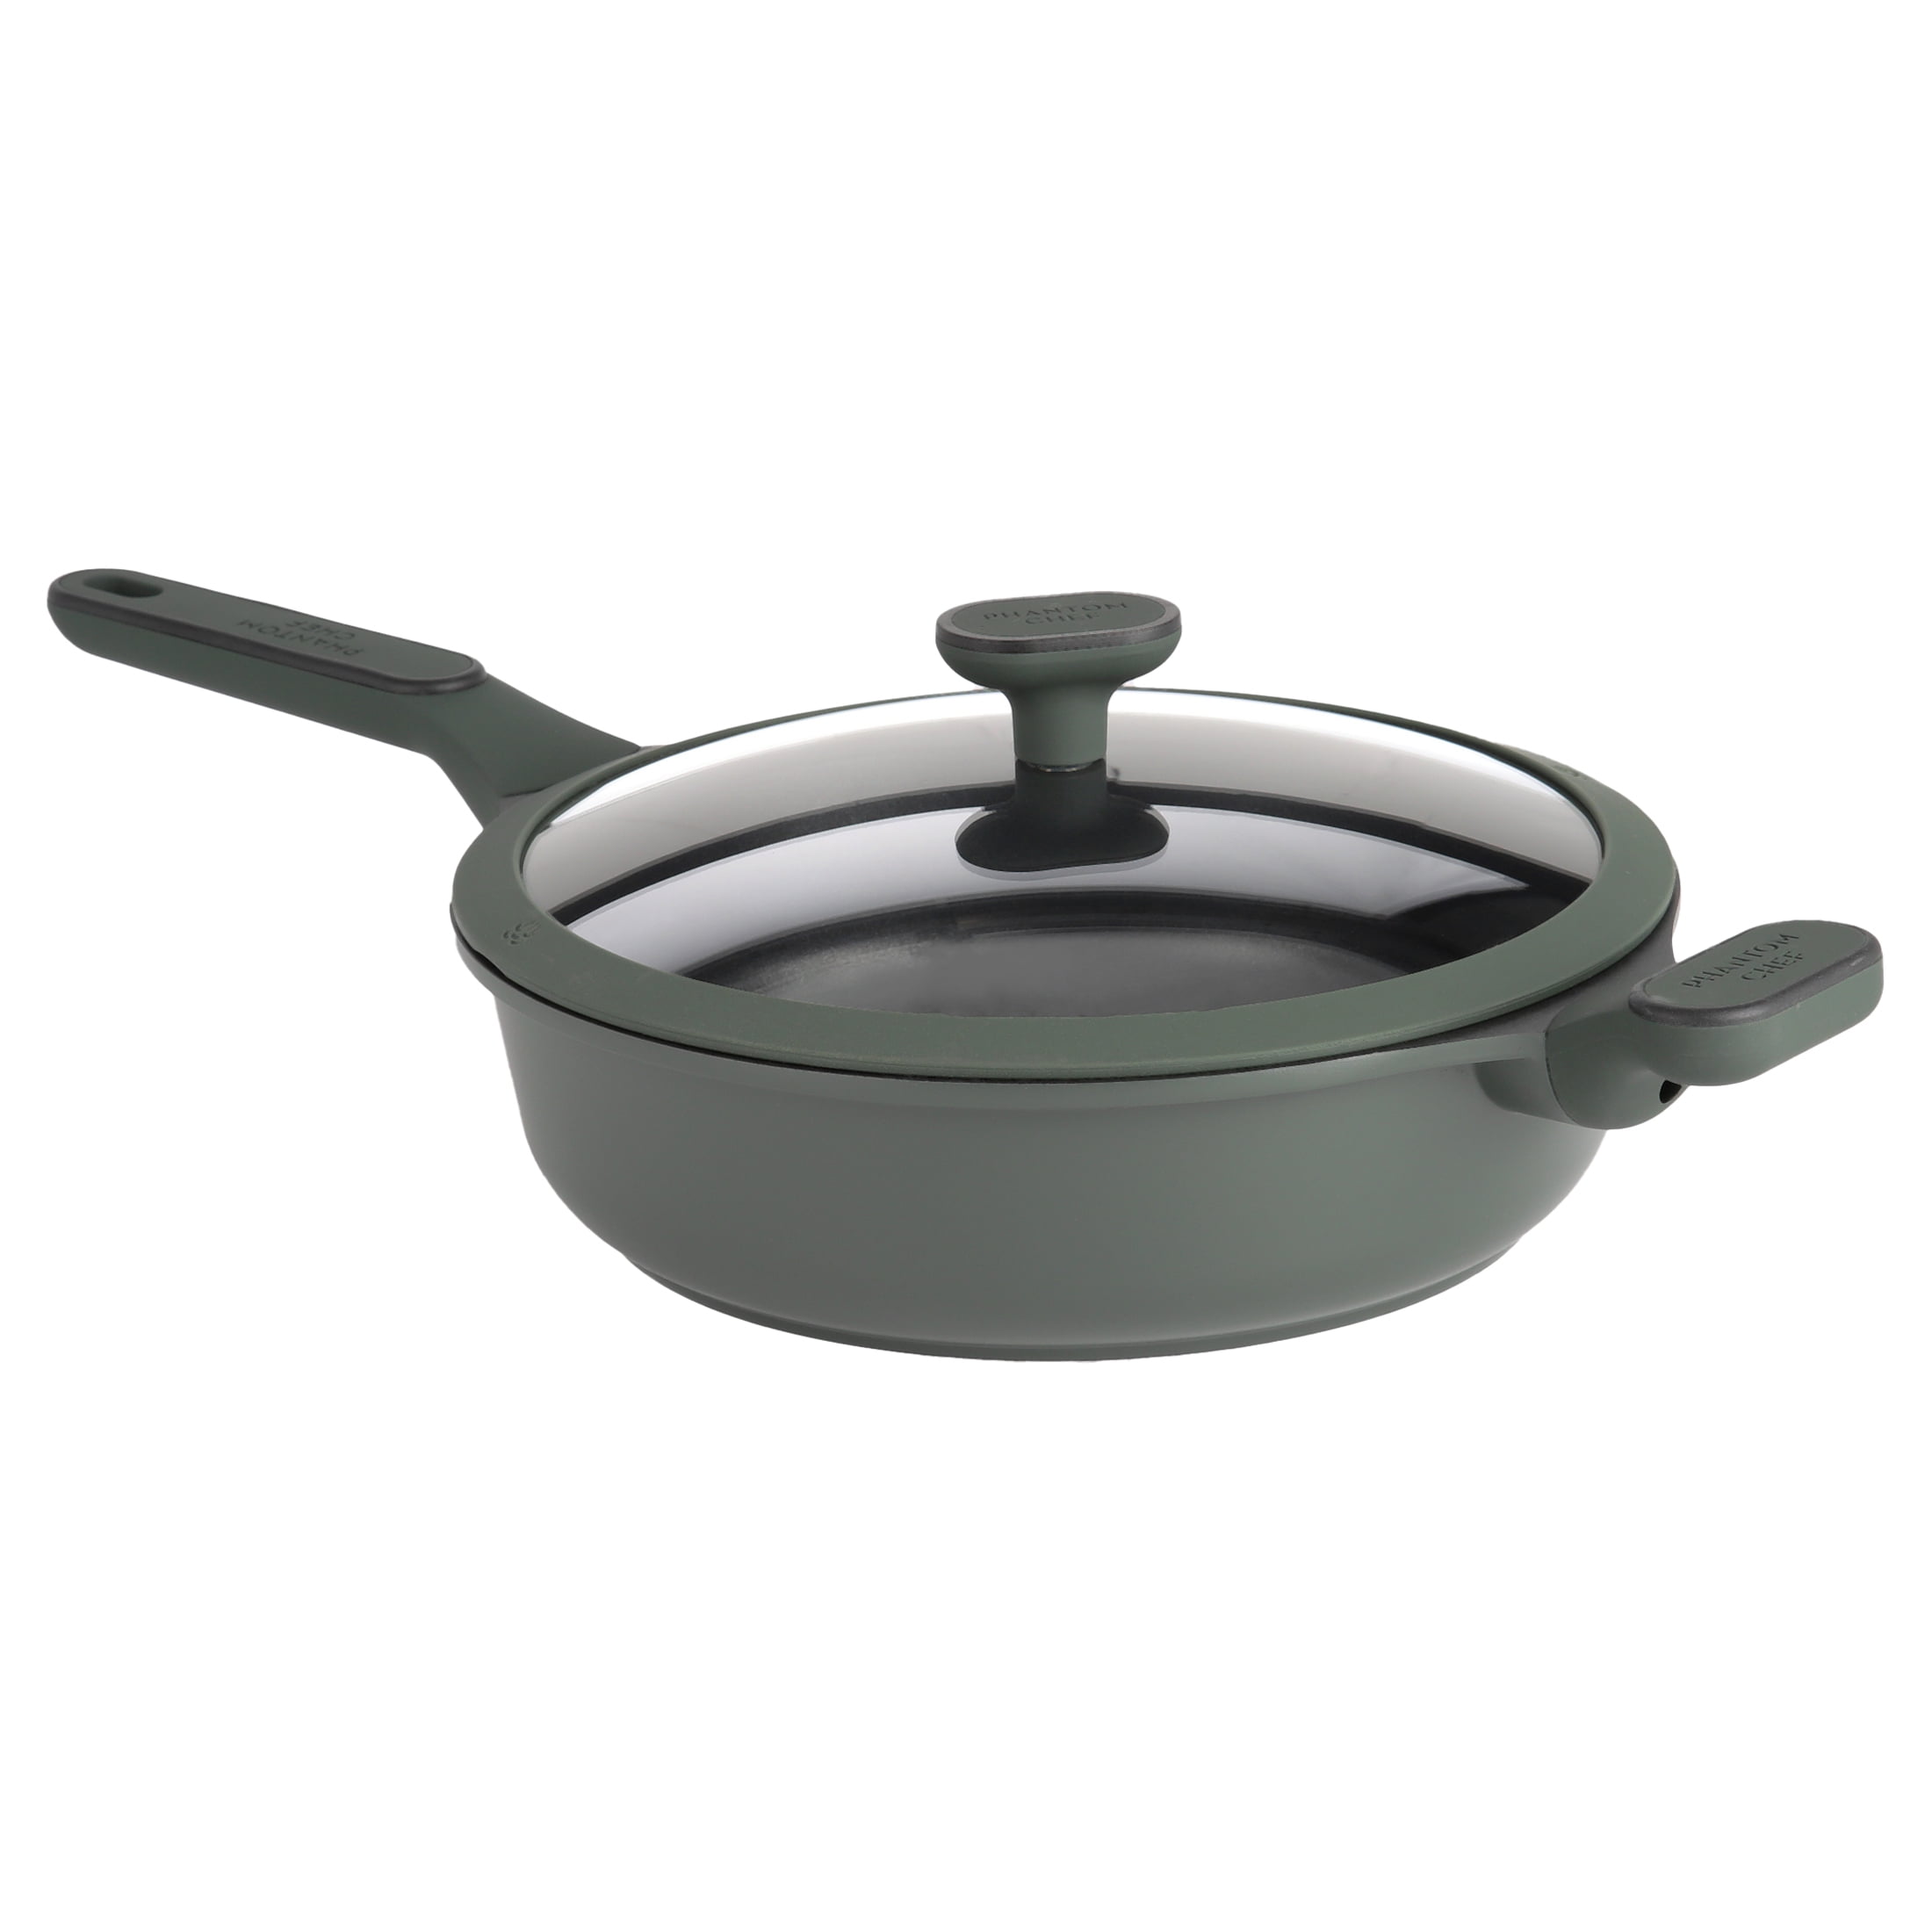 Phantom Chef 8 Inch & 11 Inch Frypan with Wood Handle and Aluminum Body –  Green Frying Pan Wok - AliExpress